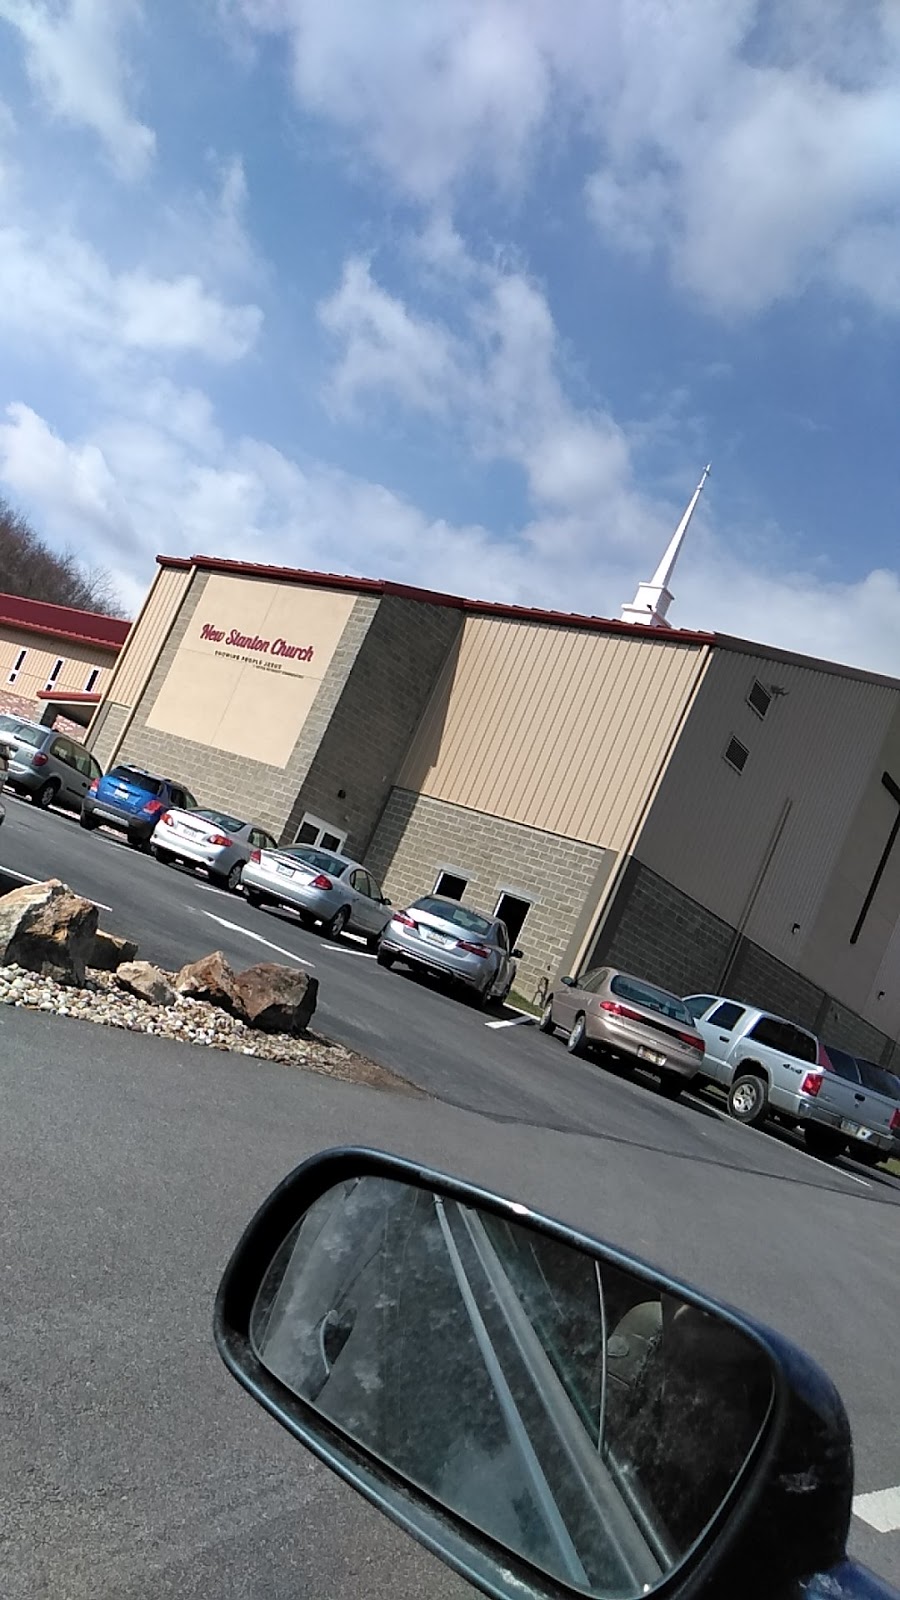 New Stanton Church (A United Methodist Congregation) | 612 S Center Ave, New Stanton, PA 15672, USA | Phone: (724) 925-9339